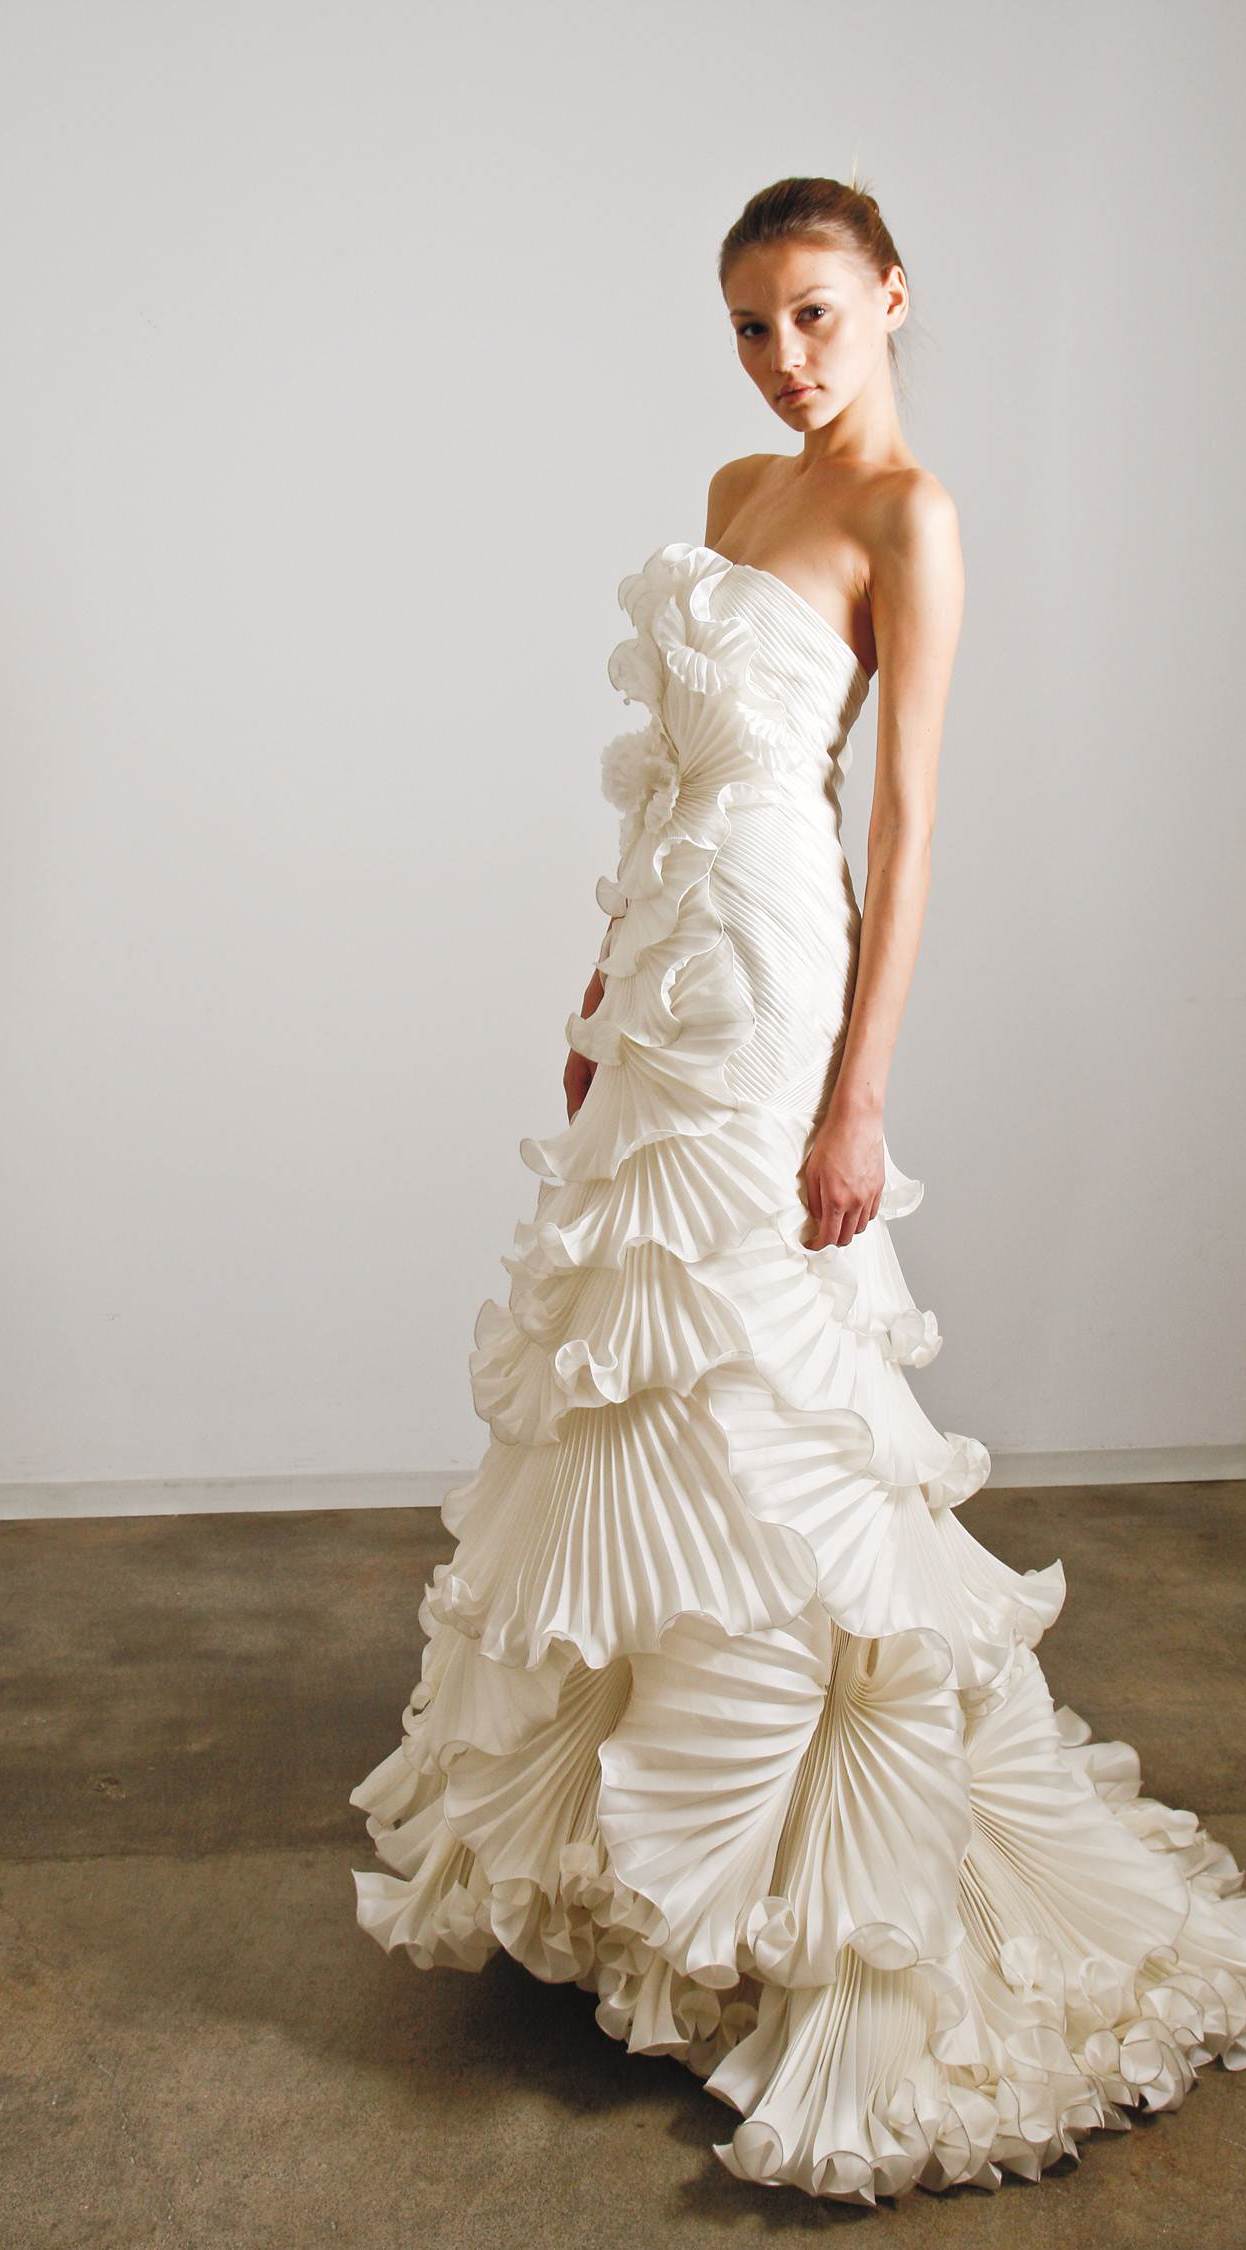 Why You Should Say 'No' To The Dress | HuffPost